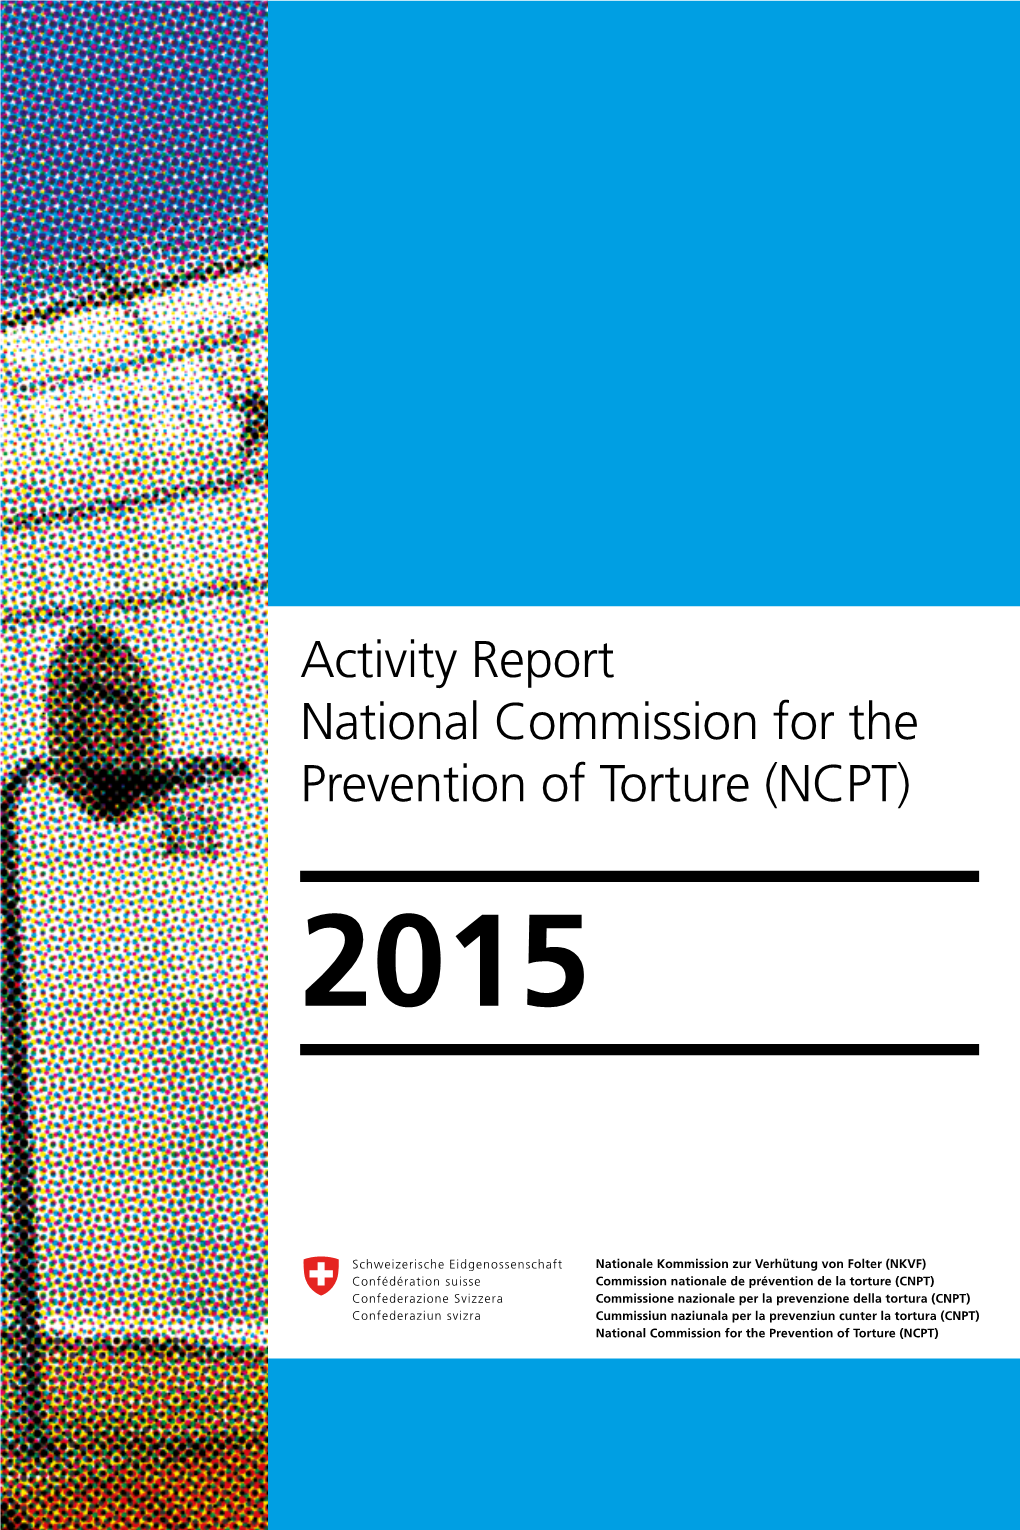 Activity Report 2015 1 NCPT Activity Report 2015 Activity Report National Commission for the Prevention of Torture (NCPT) 2015